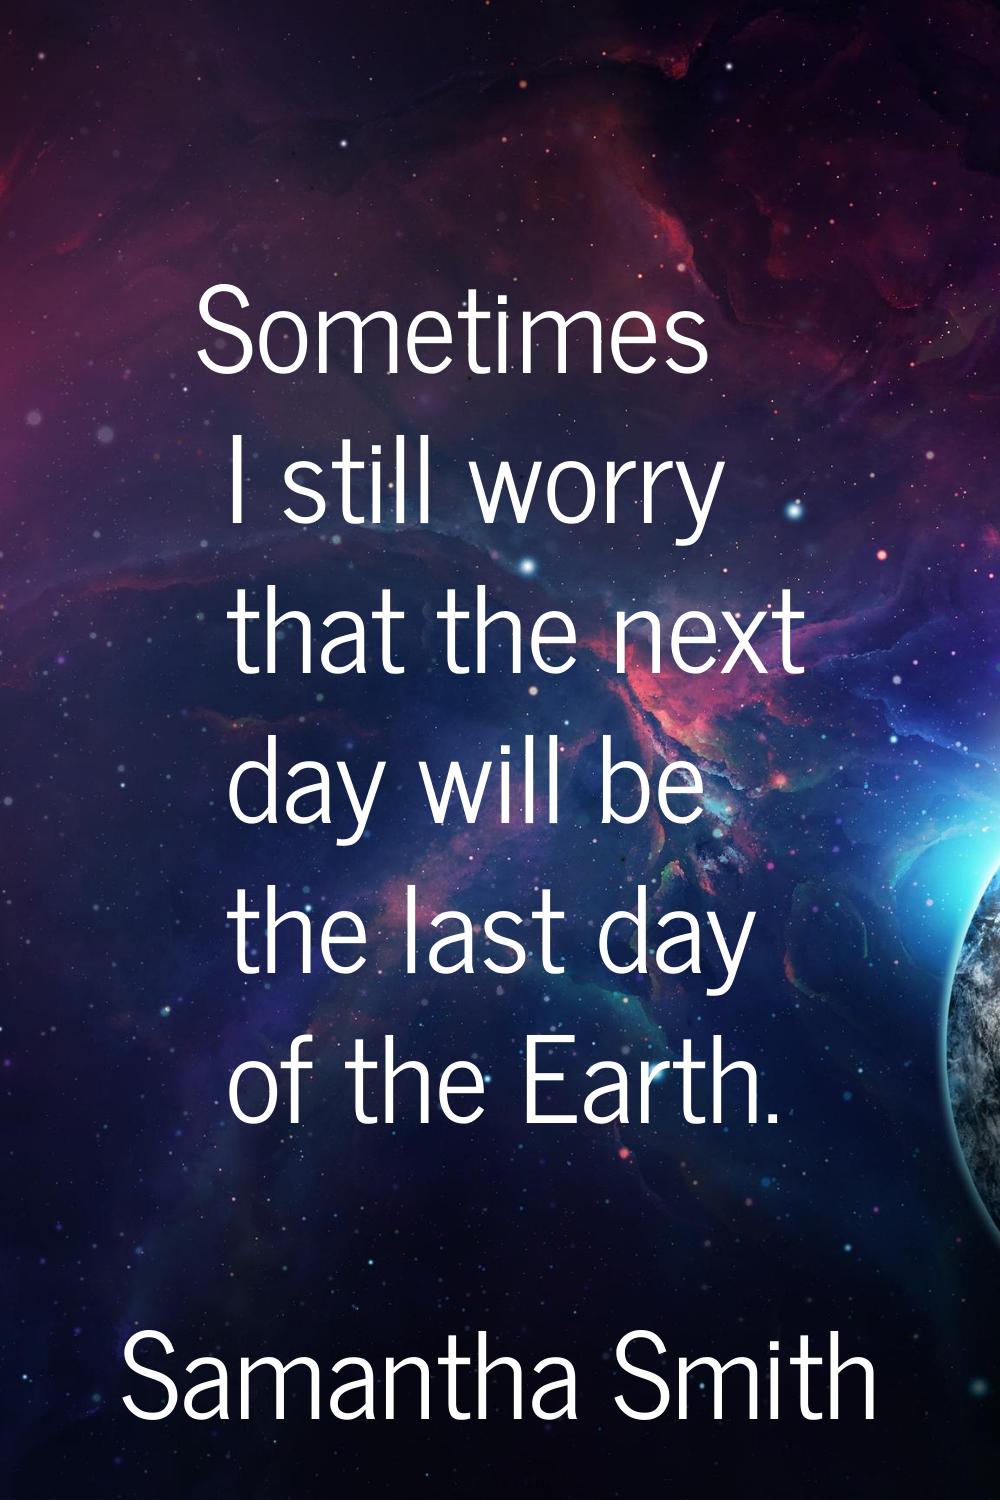 Sometimes I still worry that the next day will be the last day of the Earth.